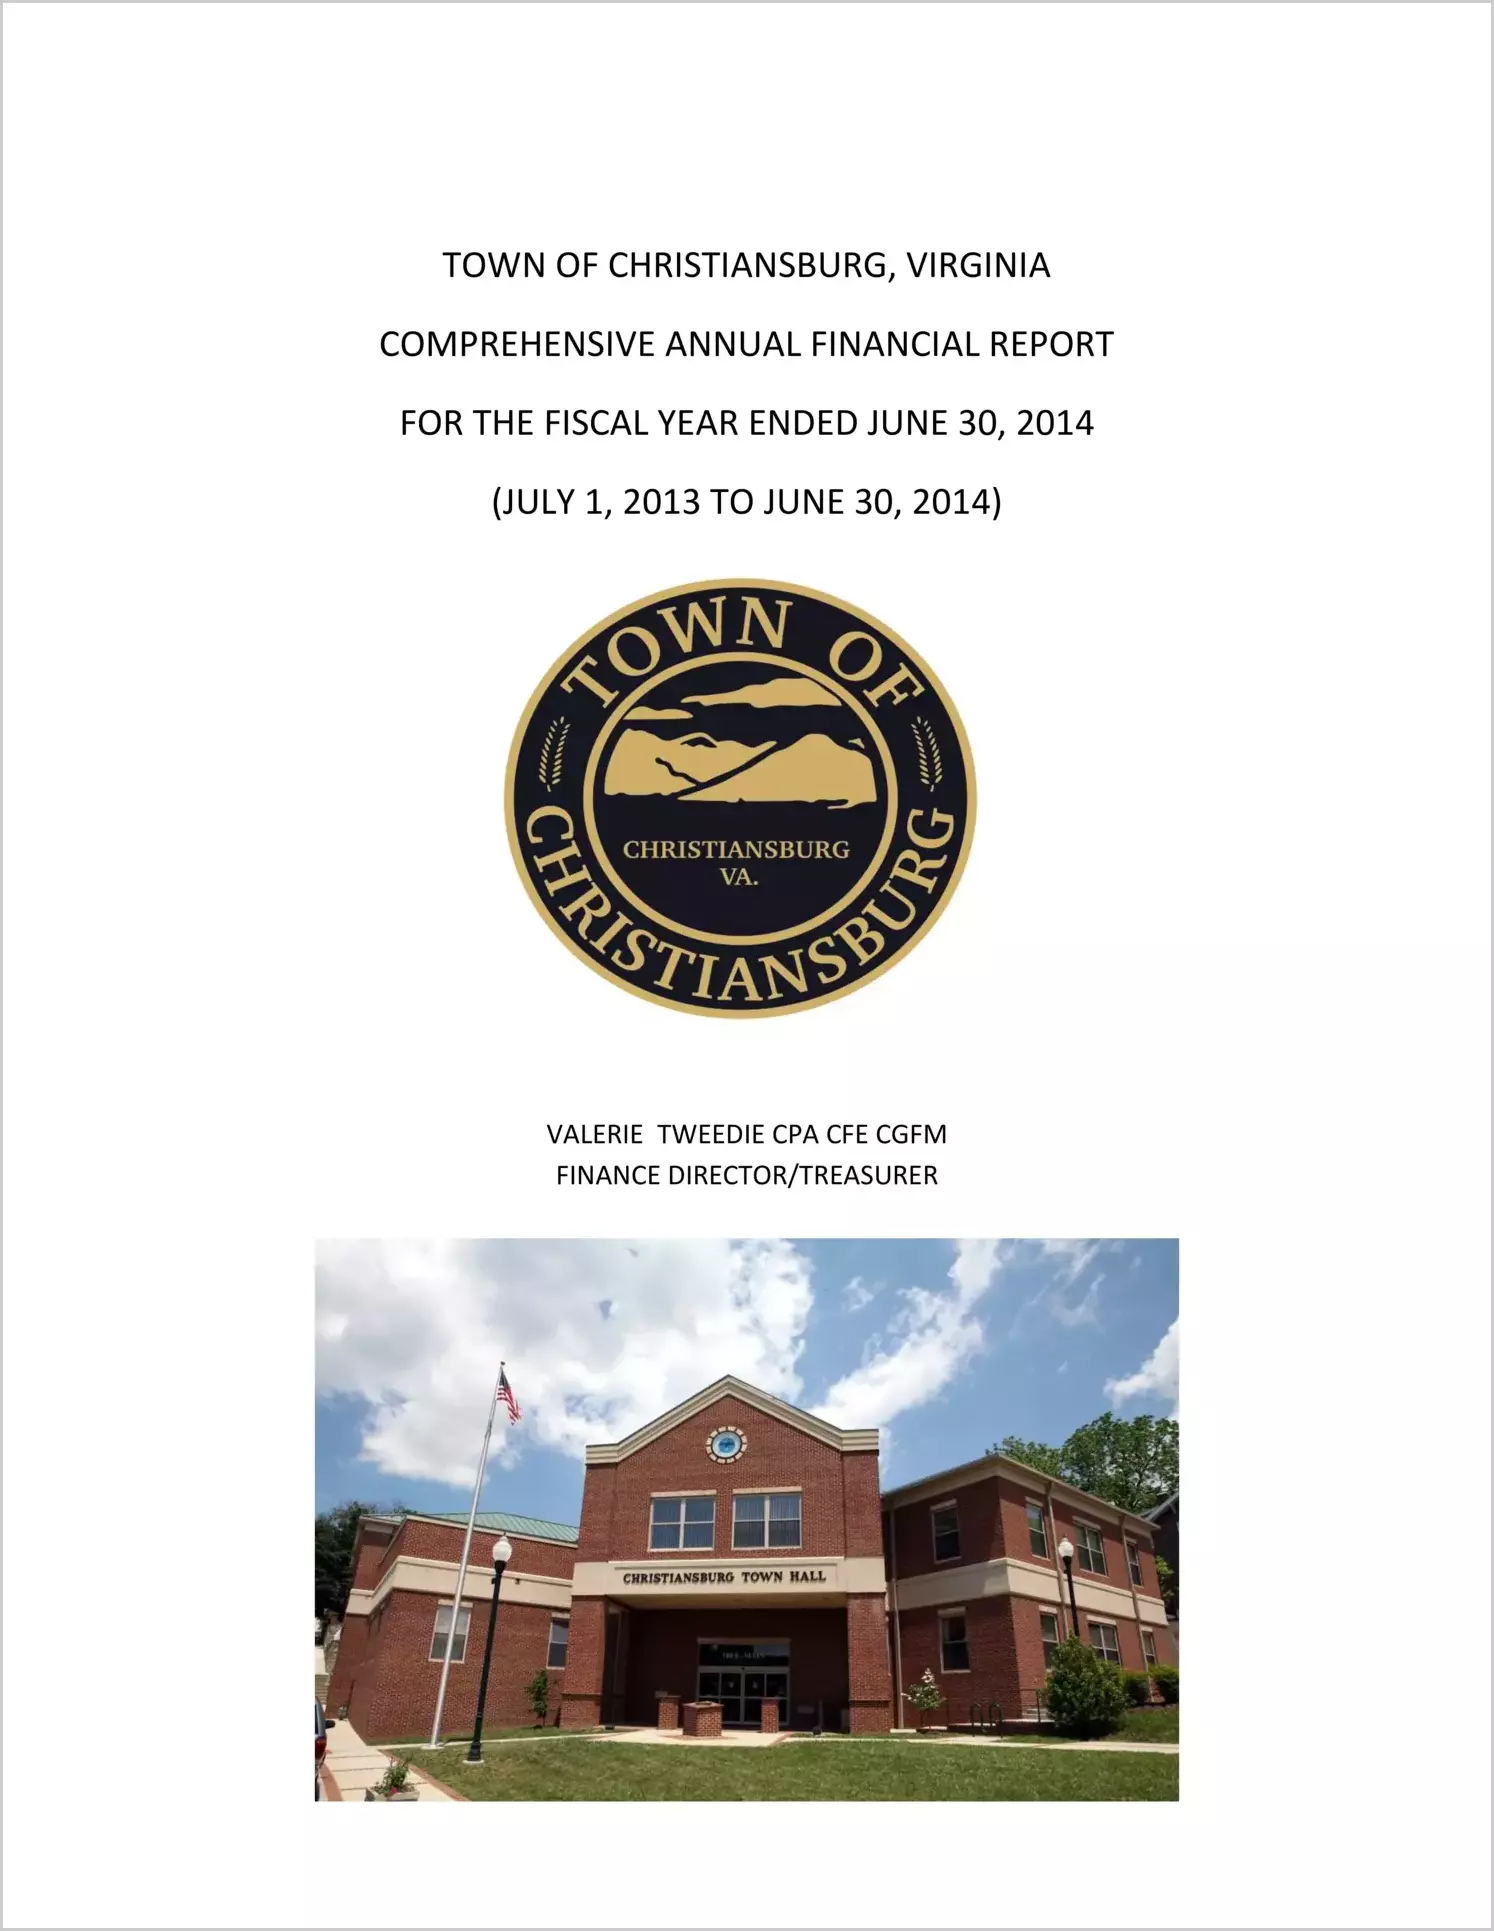 2014 Annual Financial Report for Town of Christiansburg